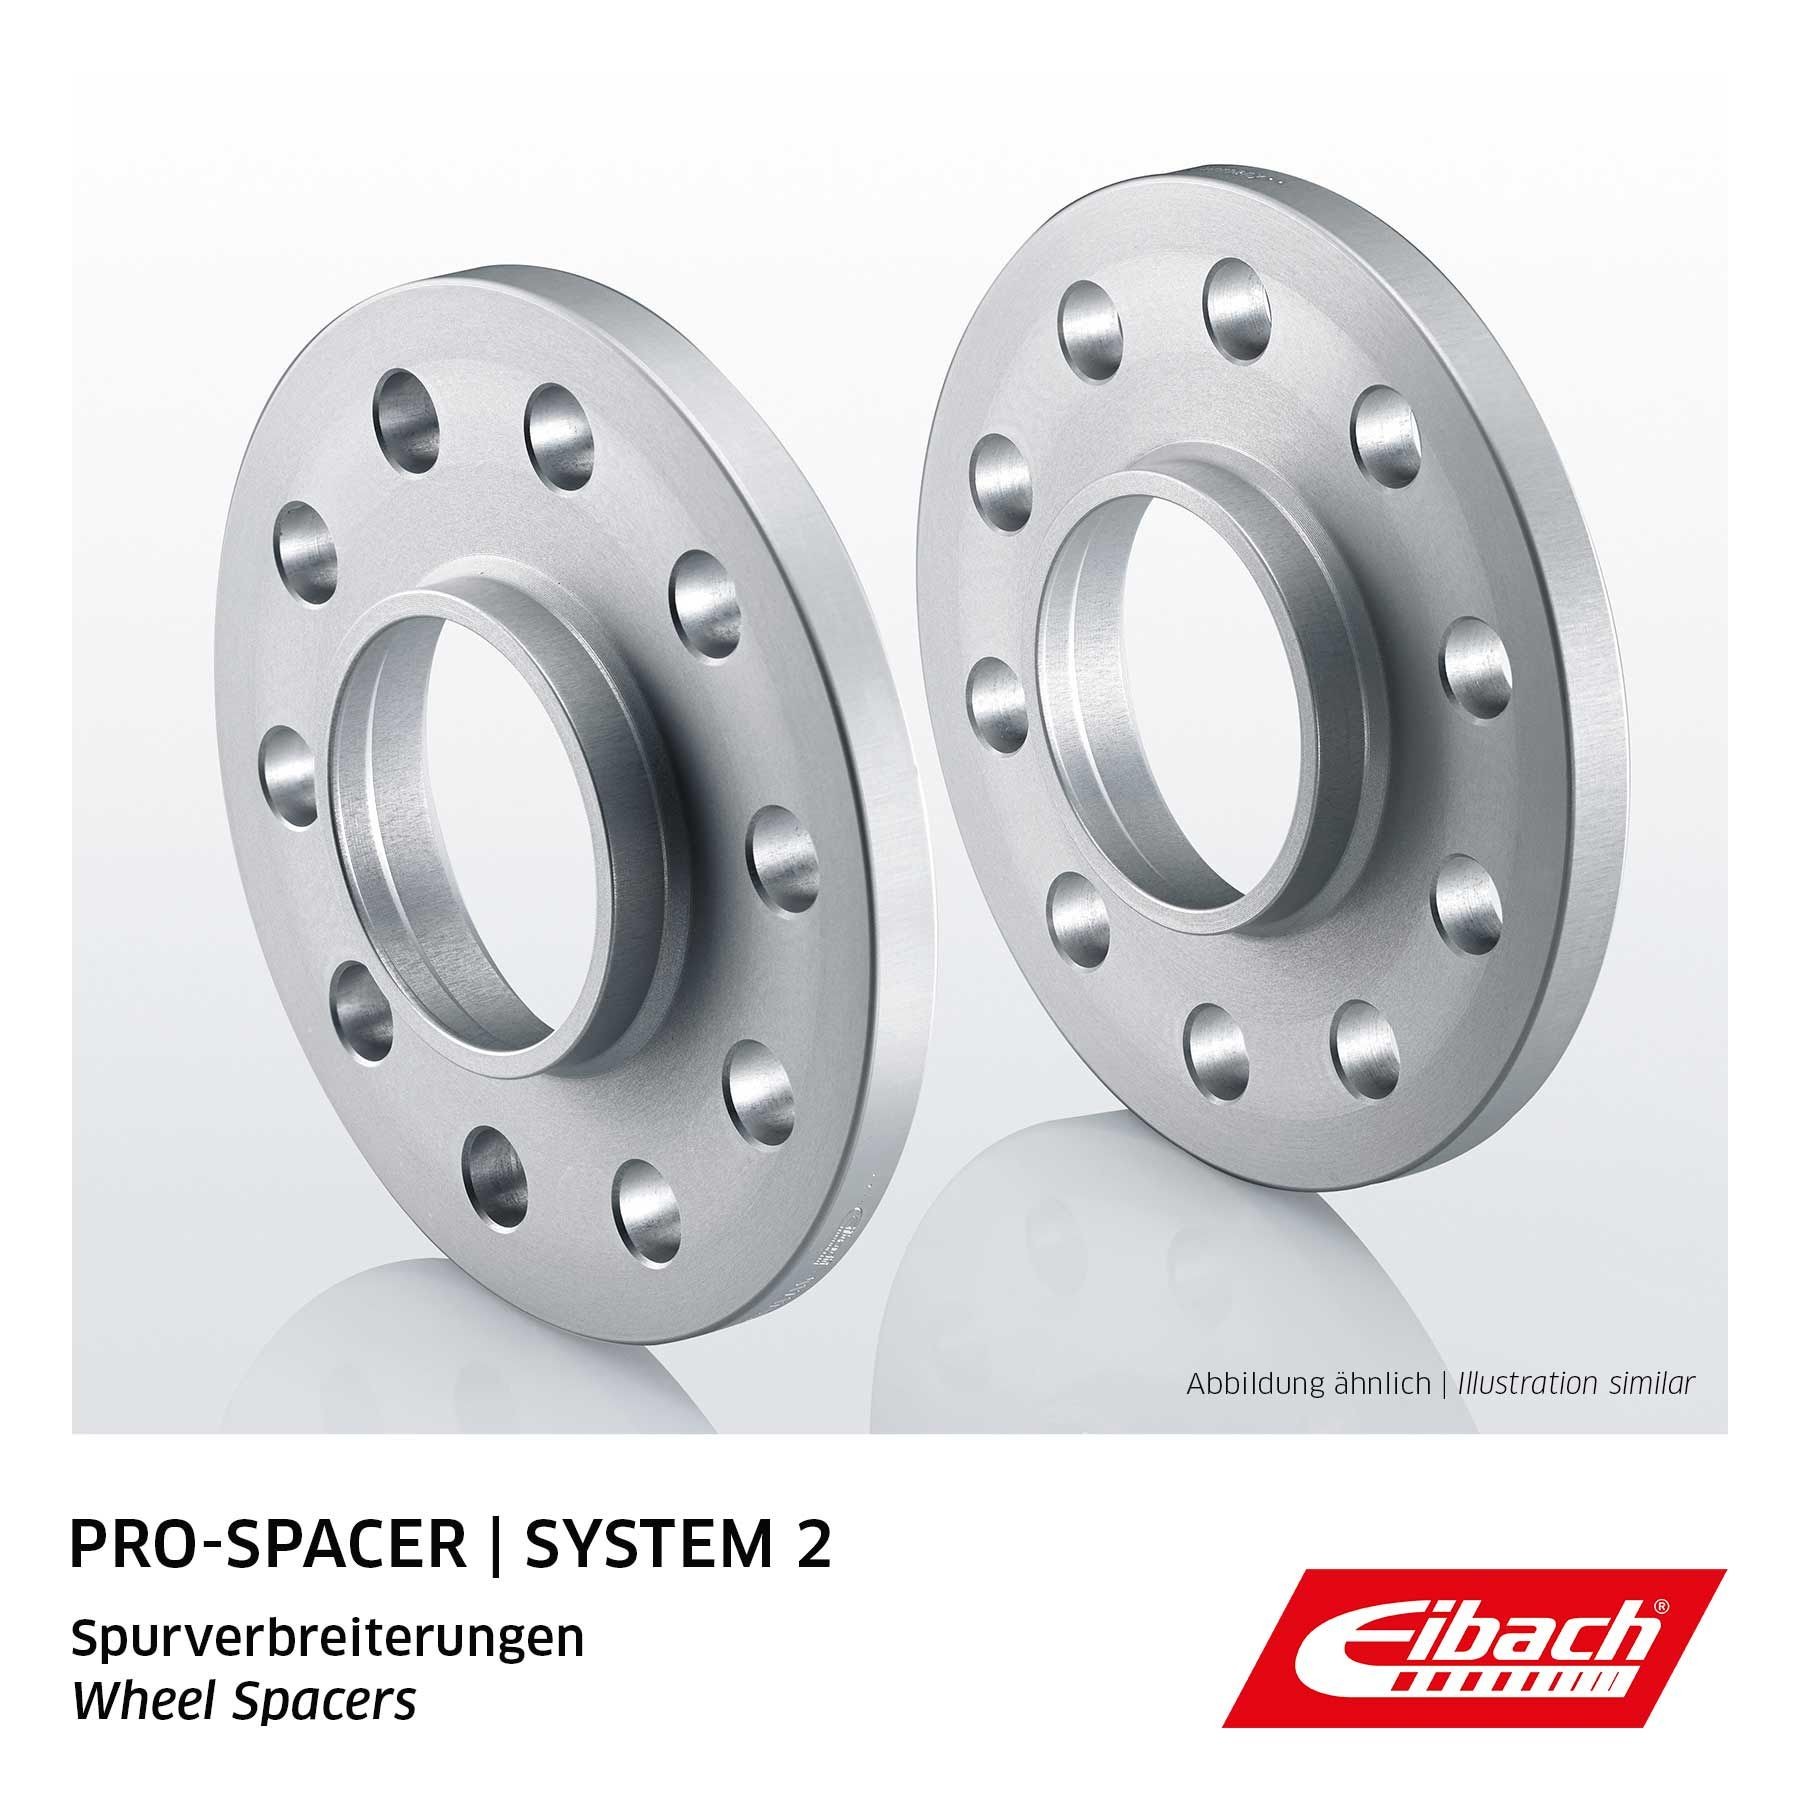 Opel Wheel spacer EIBACH S90-2-20-006 at a good price